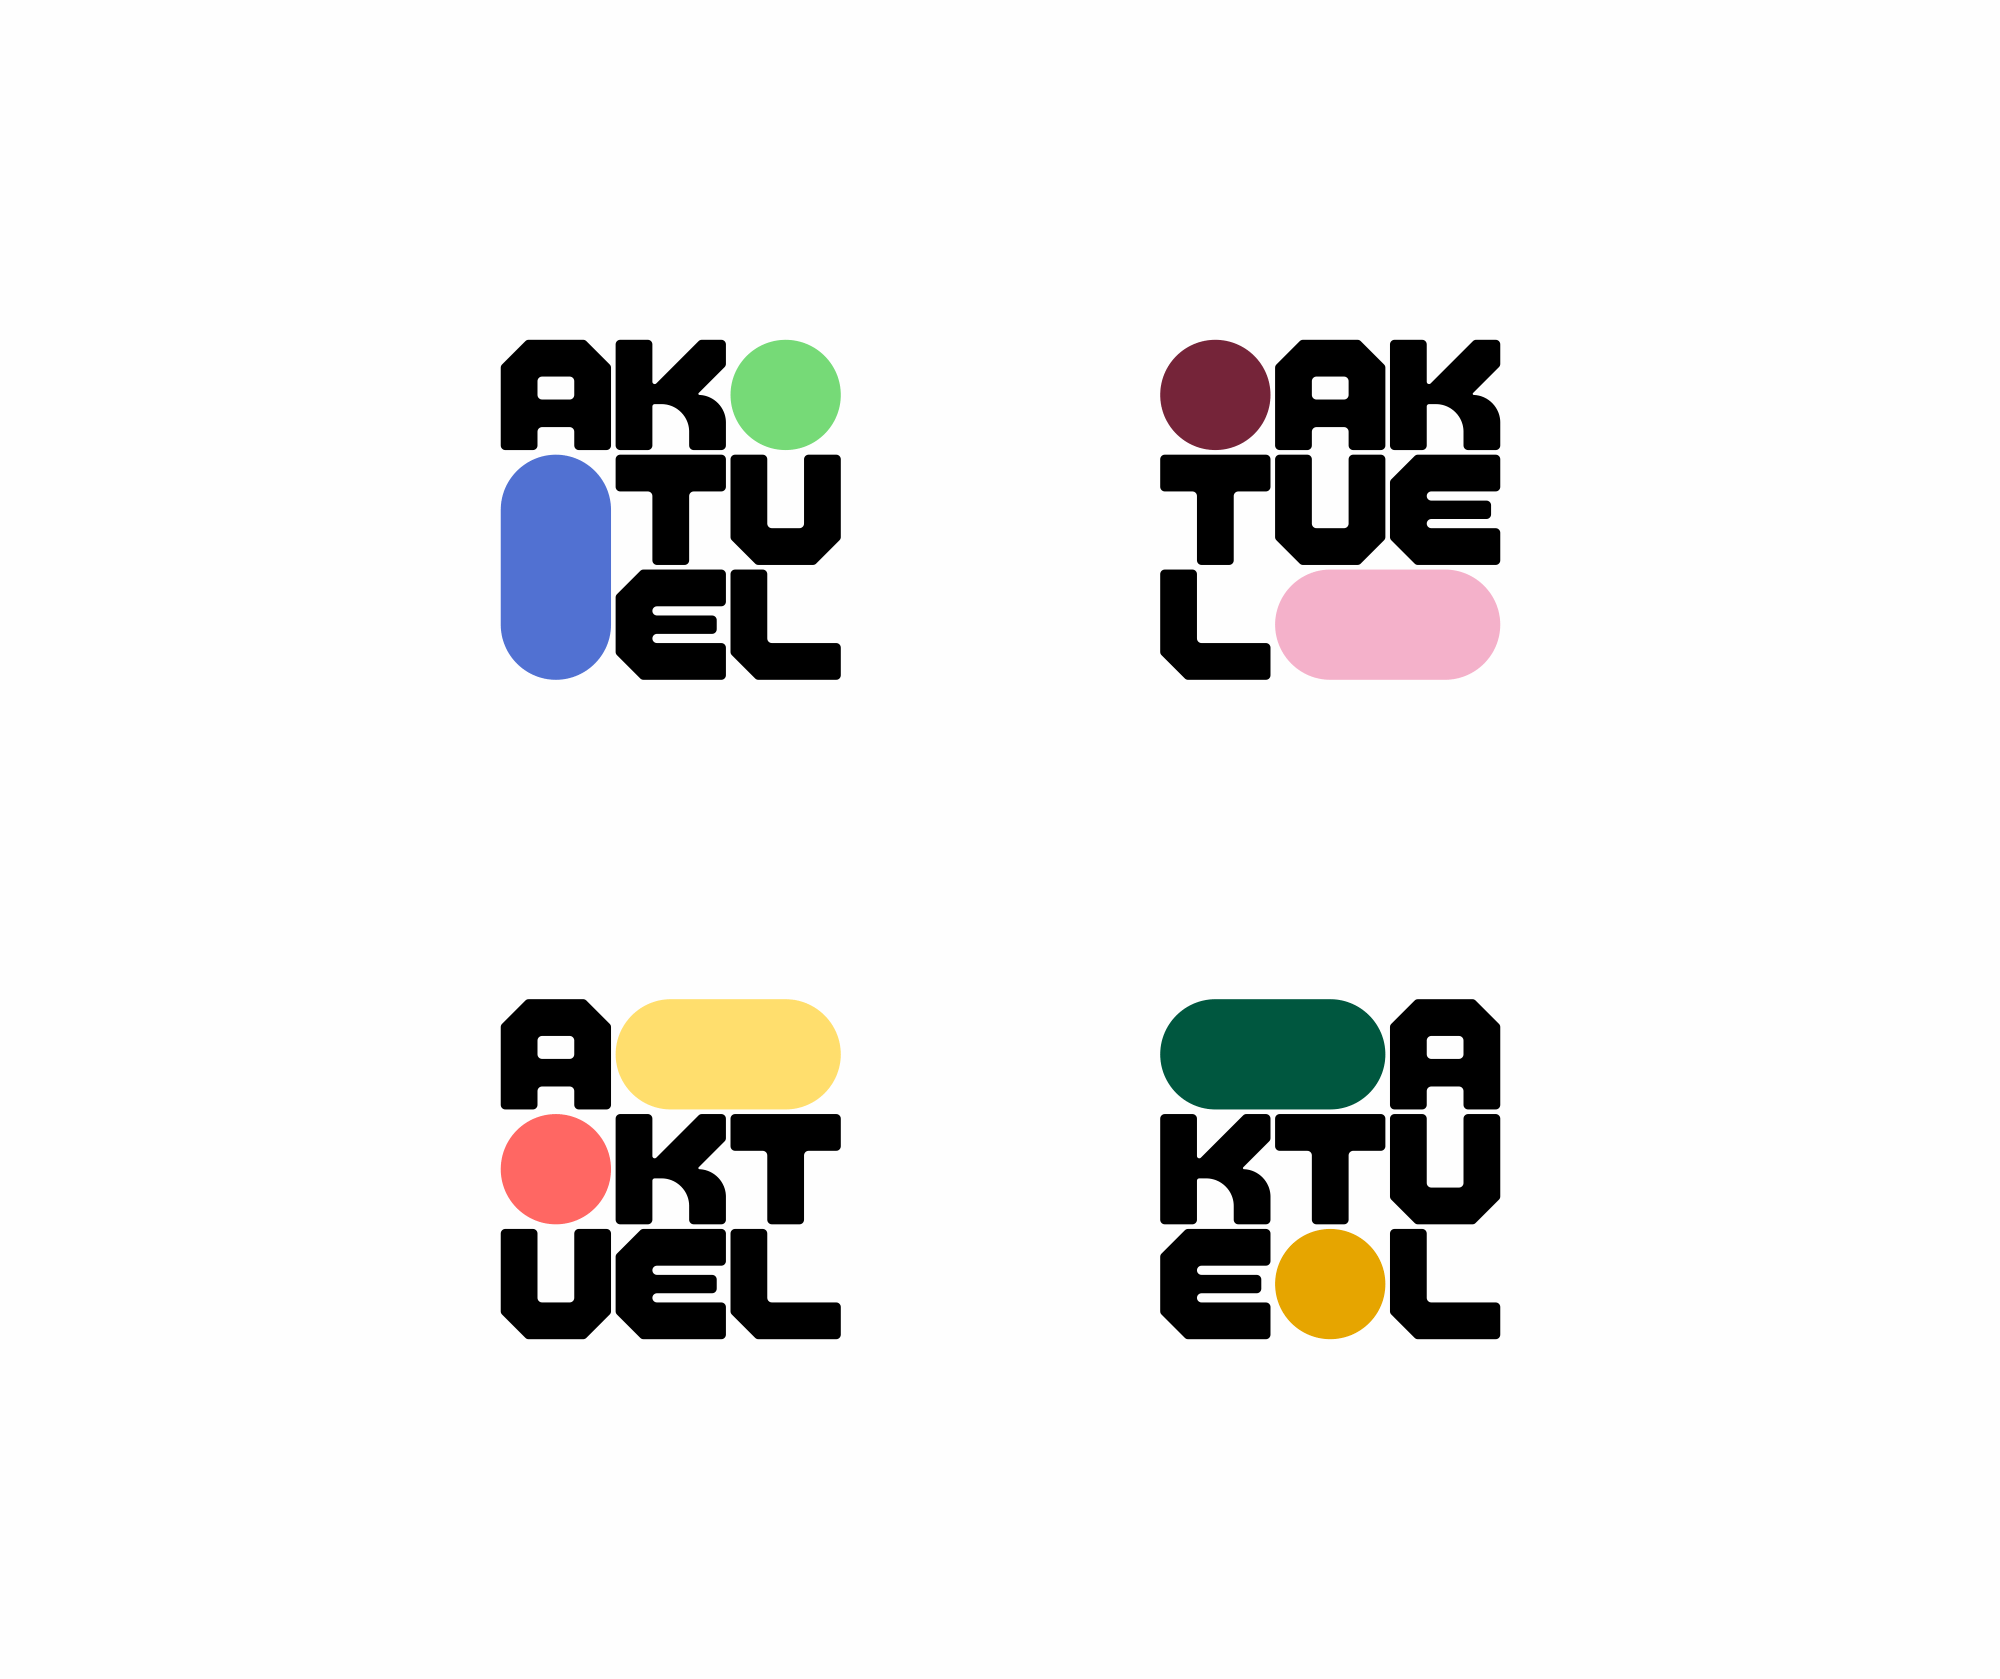 New Logo and Identity for Aktuel by Brand Brothers